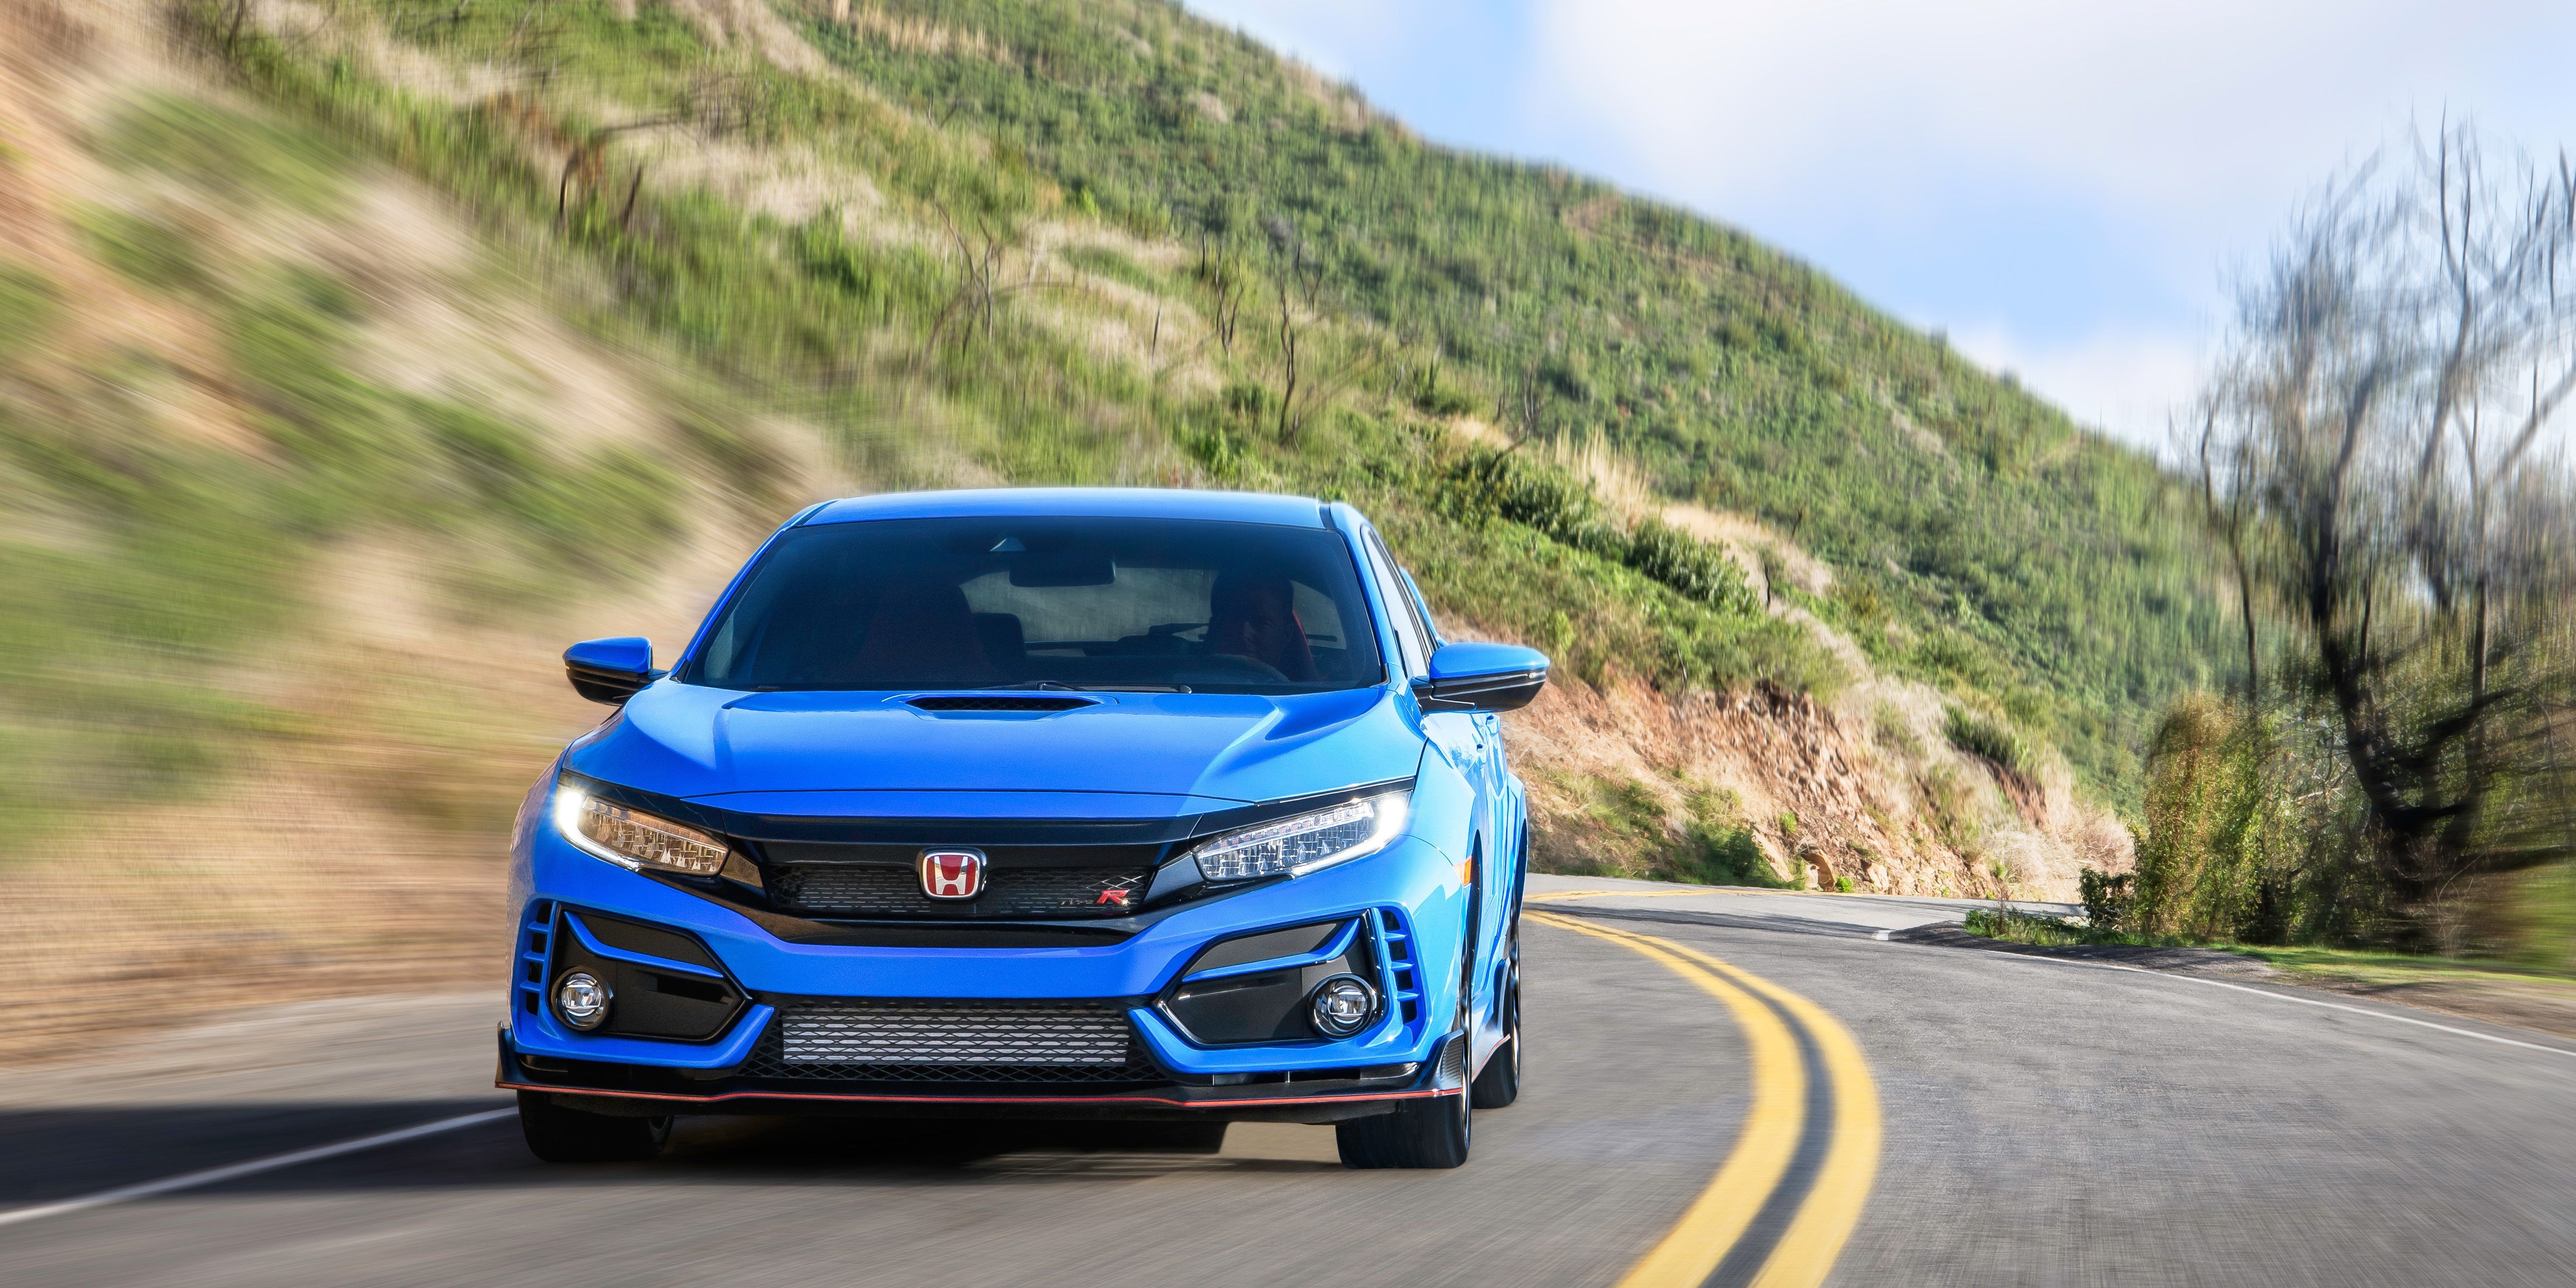 Civic Type R on the road.